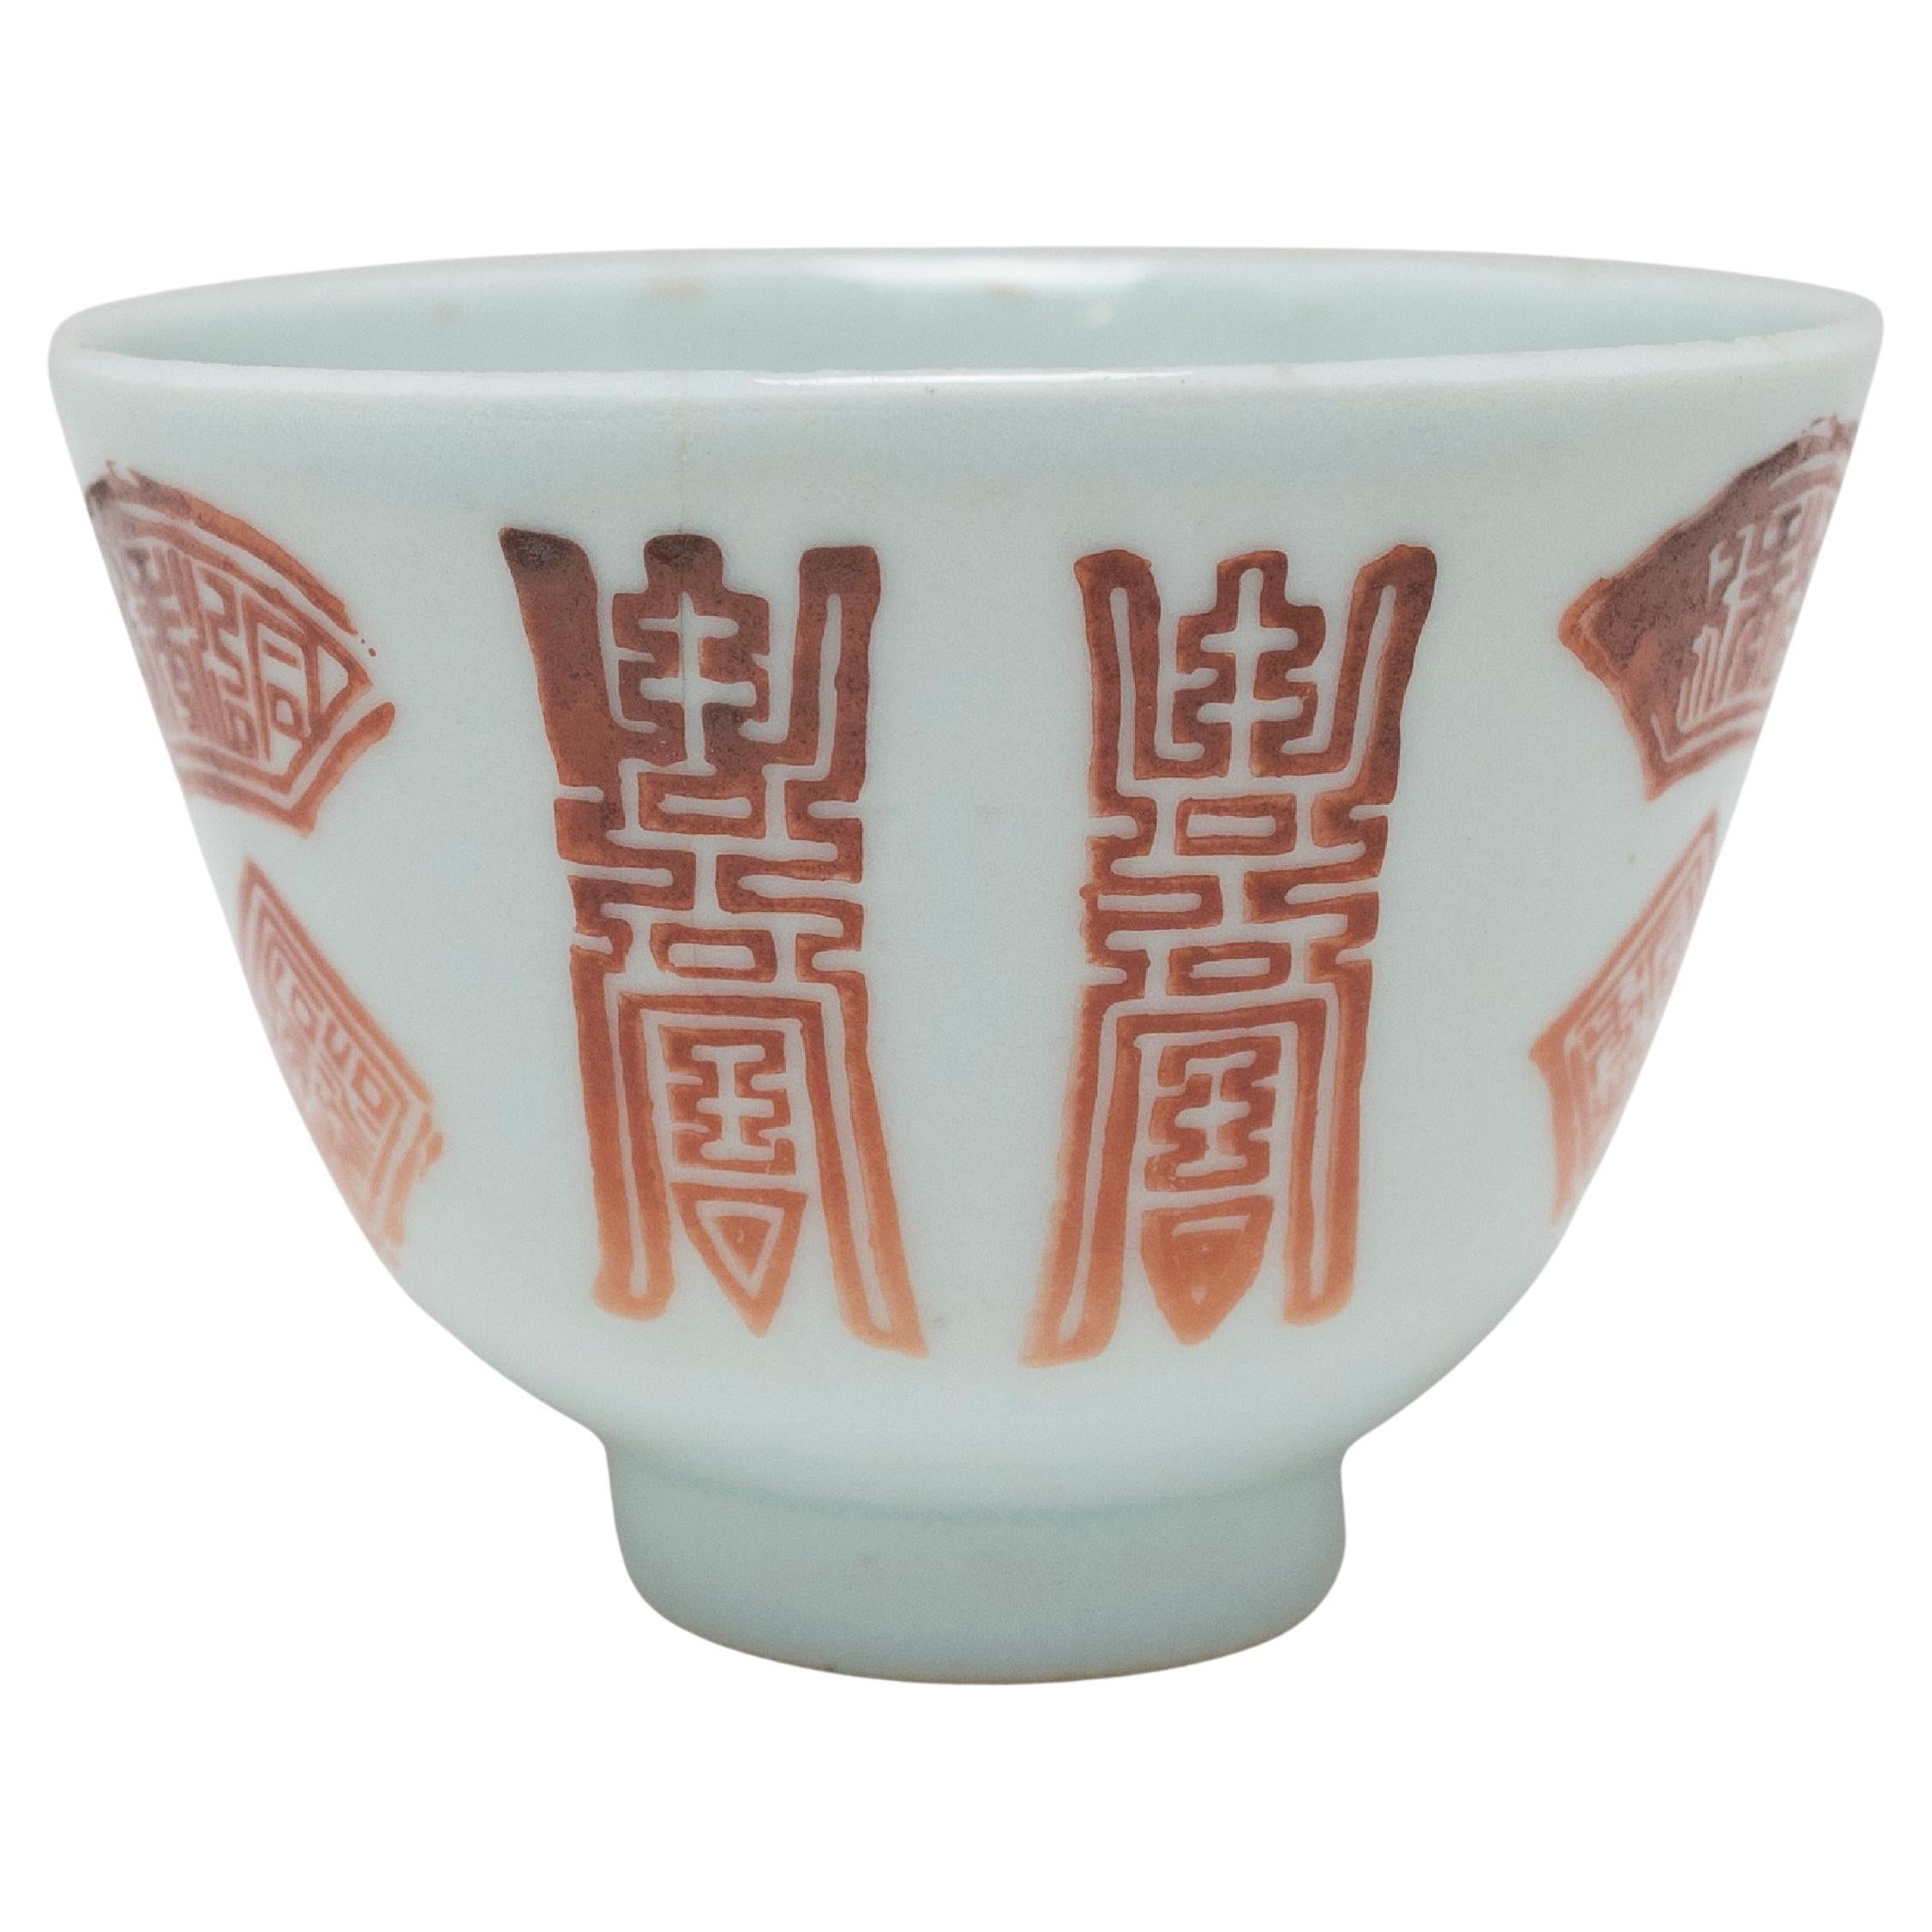 Red on White Chinese Teacup